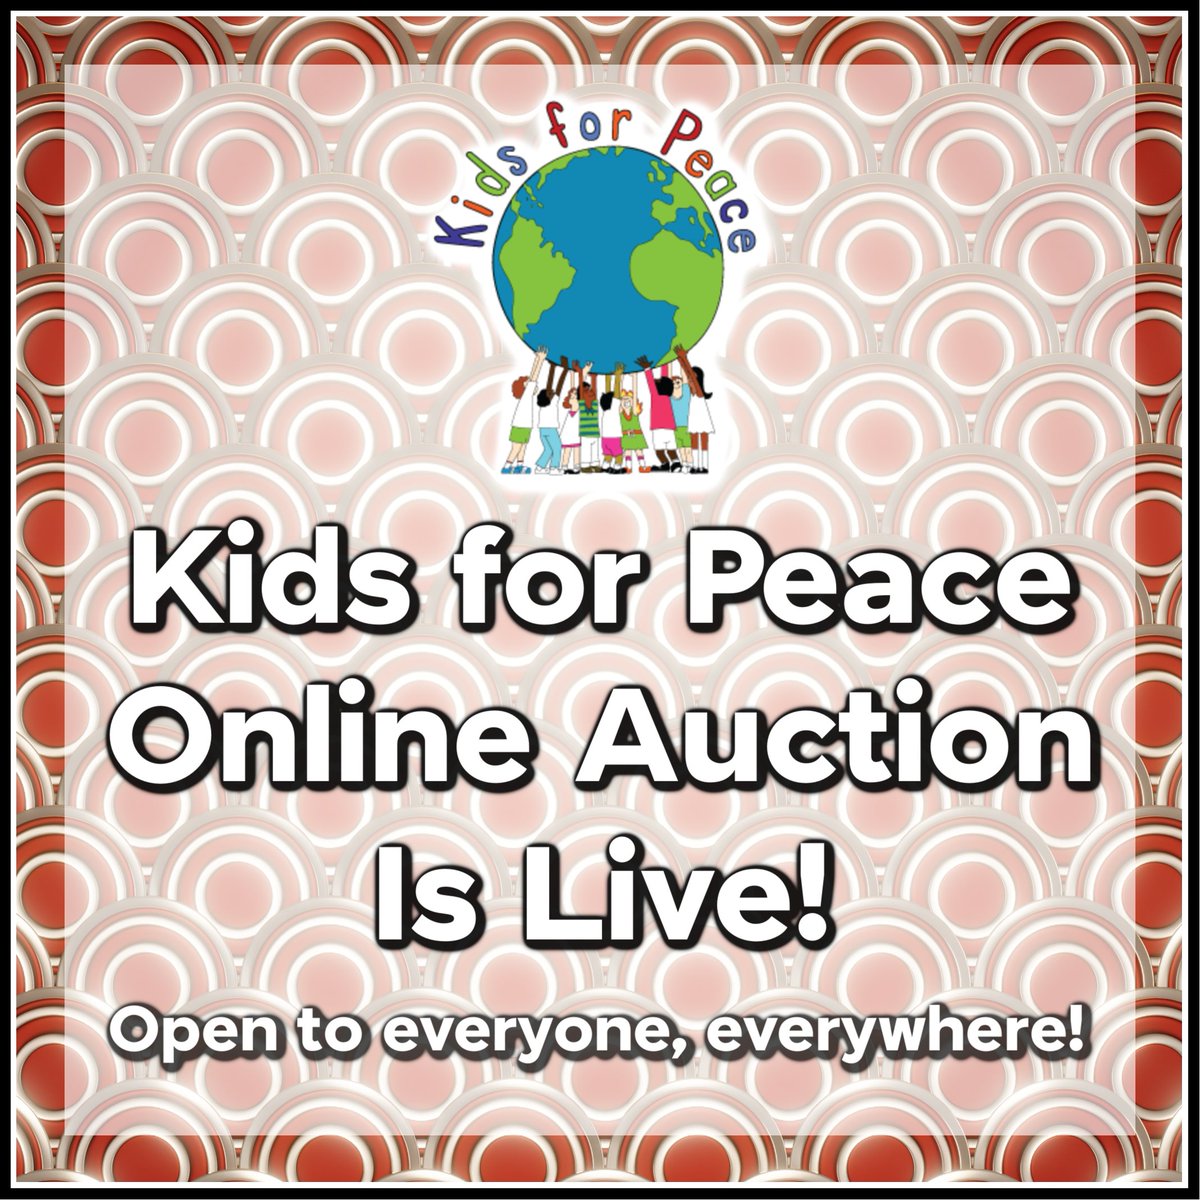 Looking for ways to support Kids for Peace and get some cool stuff, too? Join our online auction! Check it out! ❤️events.philanthropyrefined.com/e/kfpg#auction #KidsforPeace #PeaceHero #OnlineAuction #SupportTheKids